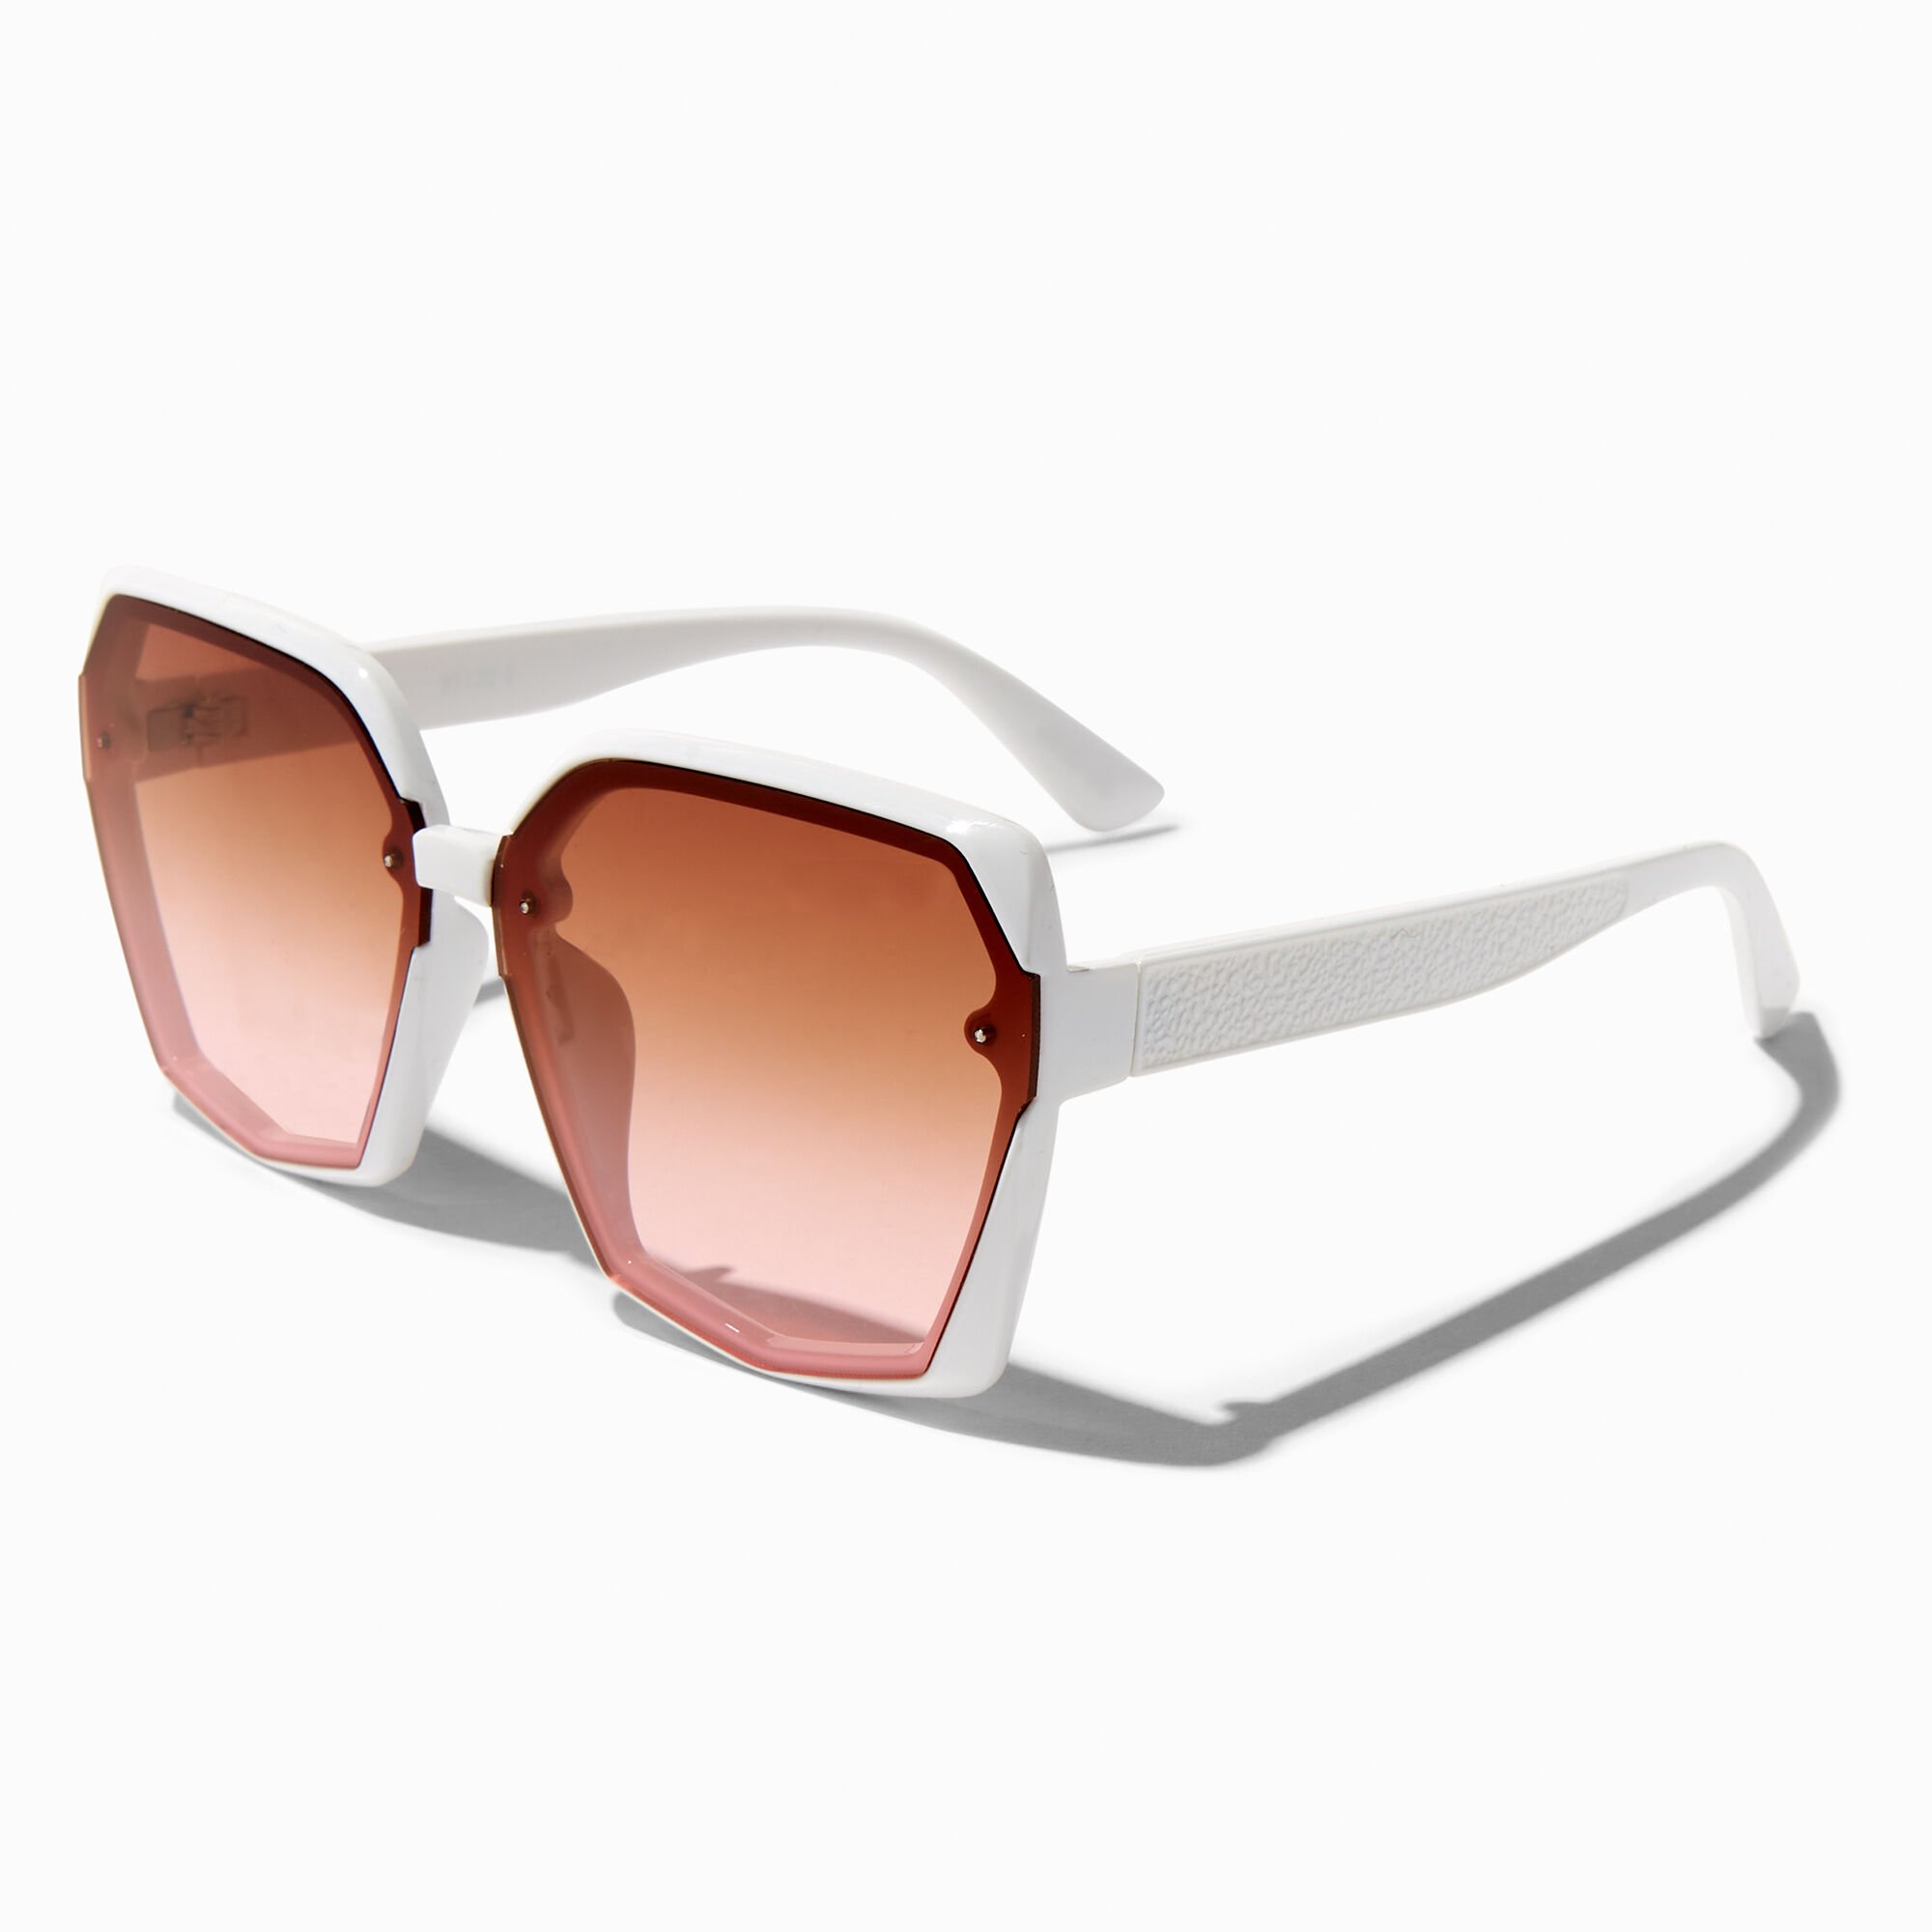 View Claires Geometric Faded Lens Sunglasses White information